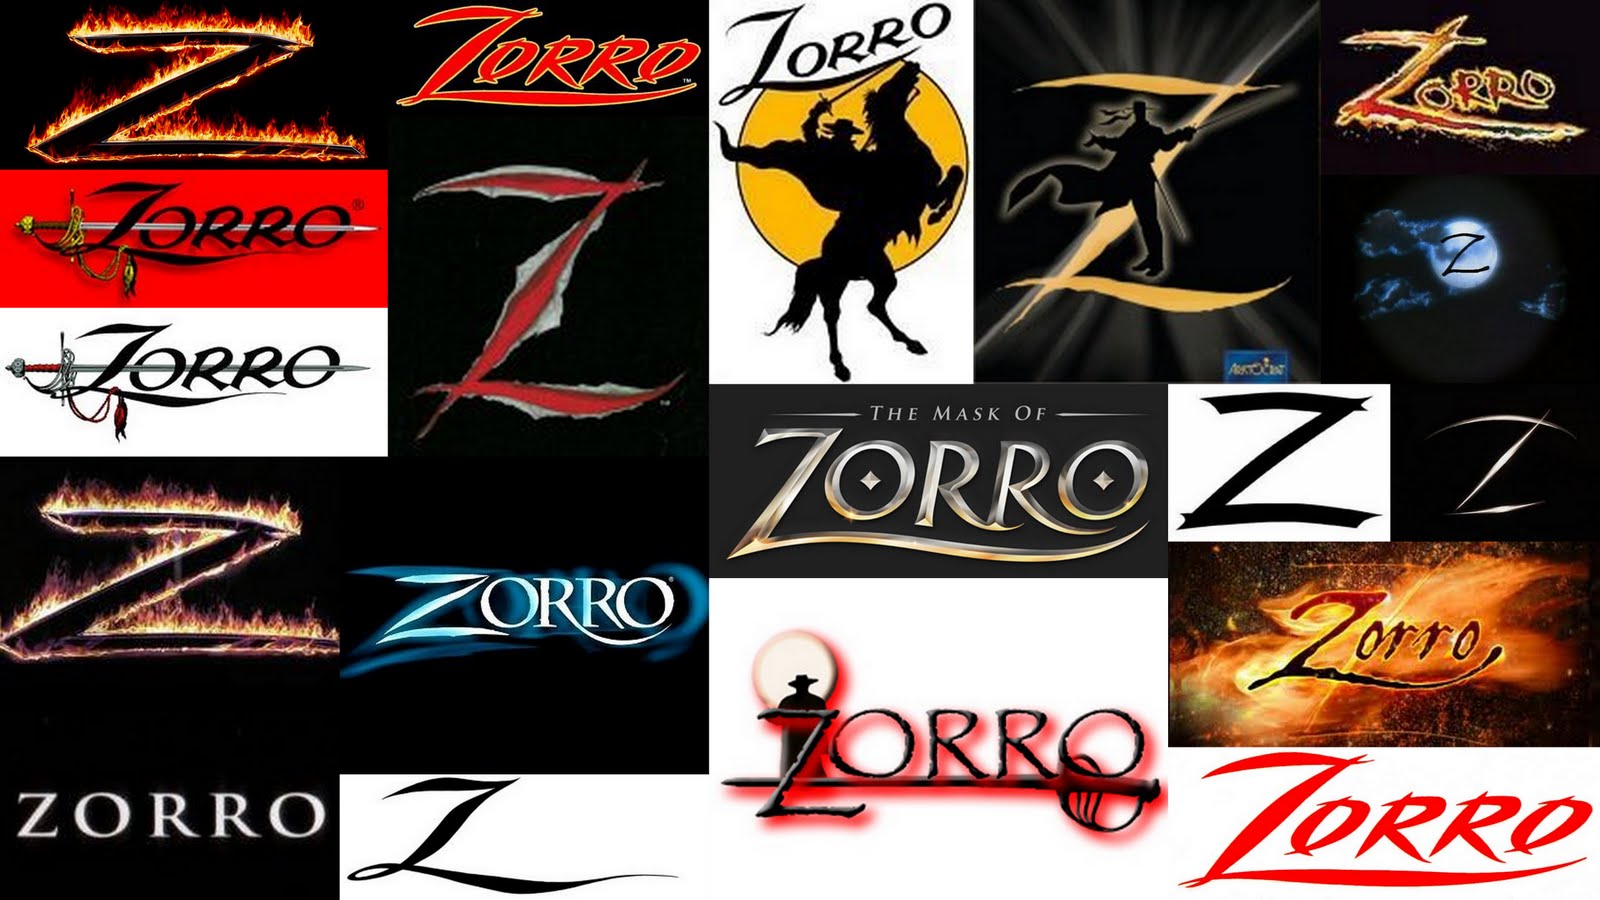 Zorro: The Legend Begins Audiobook by Johnston McCulley - Free Sample